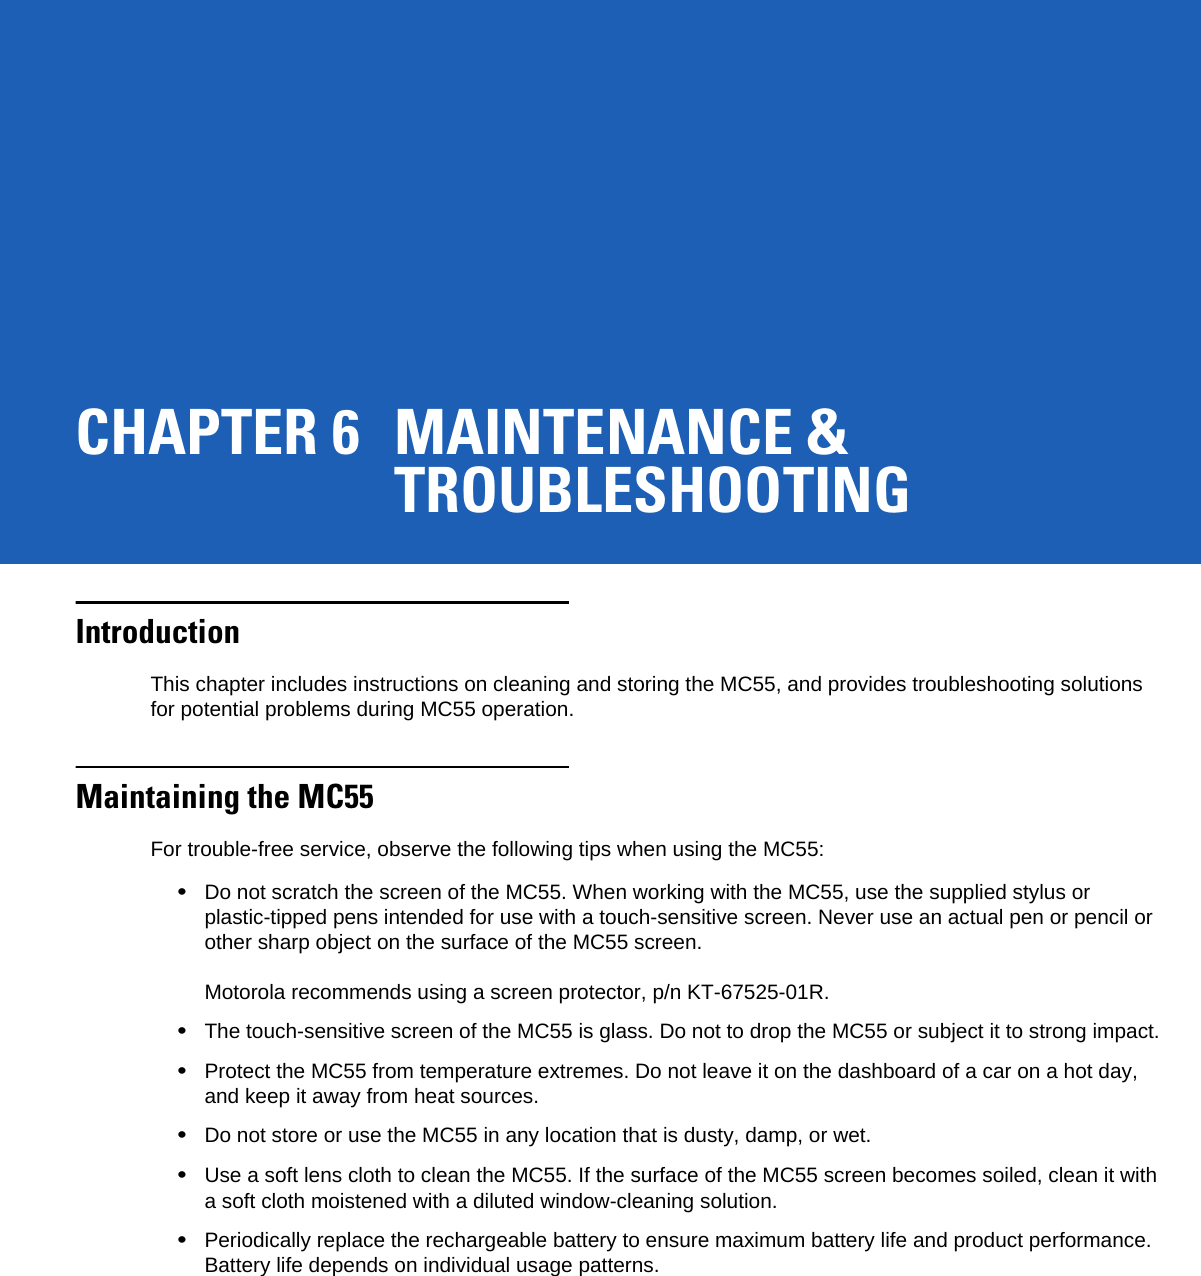 CHAPTER 6 MAINTENANCE &amp;TROUBLESHOOTINGIntroductionThis chapter includes instructions on cleaning and storing the MC55, and provides troubleshooting solutions for potential problems during MC55 operation.Maintaining the MC55For trouble-free service, observe the following tips when using the MC55:•Do not scratch the screen of the MC55. When working with the MC55, use the supplied stylus or plastic-tipped pens intended for use with a touch-sensitive screen. Never use an actual pen or pencil or other sharp object on the surface of the MC55 screen. Motorola recommends using a screen protector, p/n KT-67525-01R.•The touch-sensitive screen of the MC55 is glass. Do not to drop the MC55 or subject it to strong impact.•Protect the MC55 from temperature extremes. Do not leave it on the dashboard of a car on a hot day, and keep it away from heat sources.•Do not store or use the MC55 in any location that is dusty, damp, or wet.•Use a soft lens cloth to clean the MC55. If the surface of the MC55 screen becomes soiled, clean it with a soft cloth moistened with a diluted window-cleaning solution.•Periodically replace the rechargeable battery to ensure maximum battery life and product performance. Battery life depends on individual usage patterns.